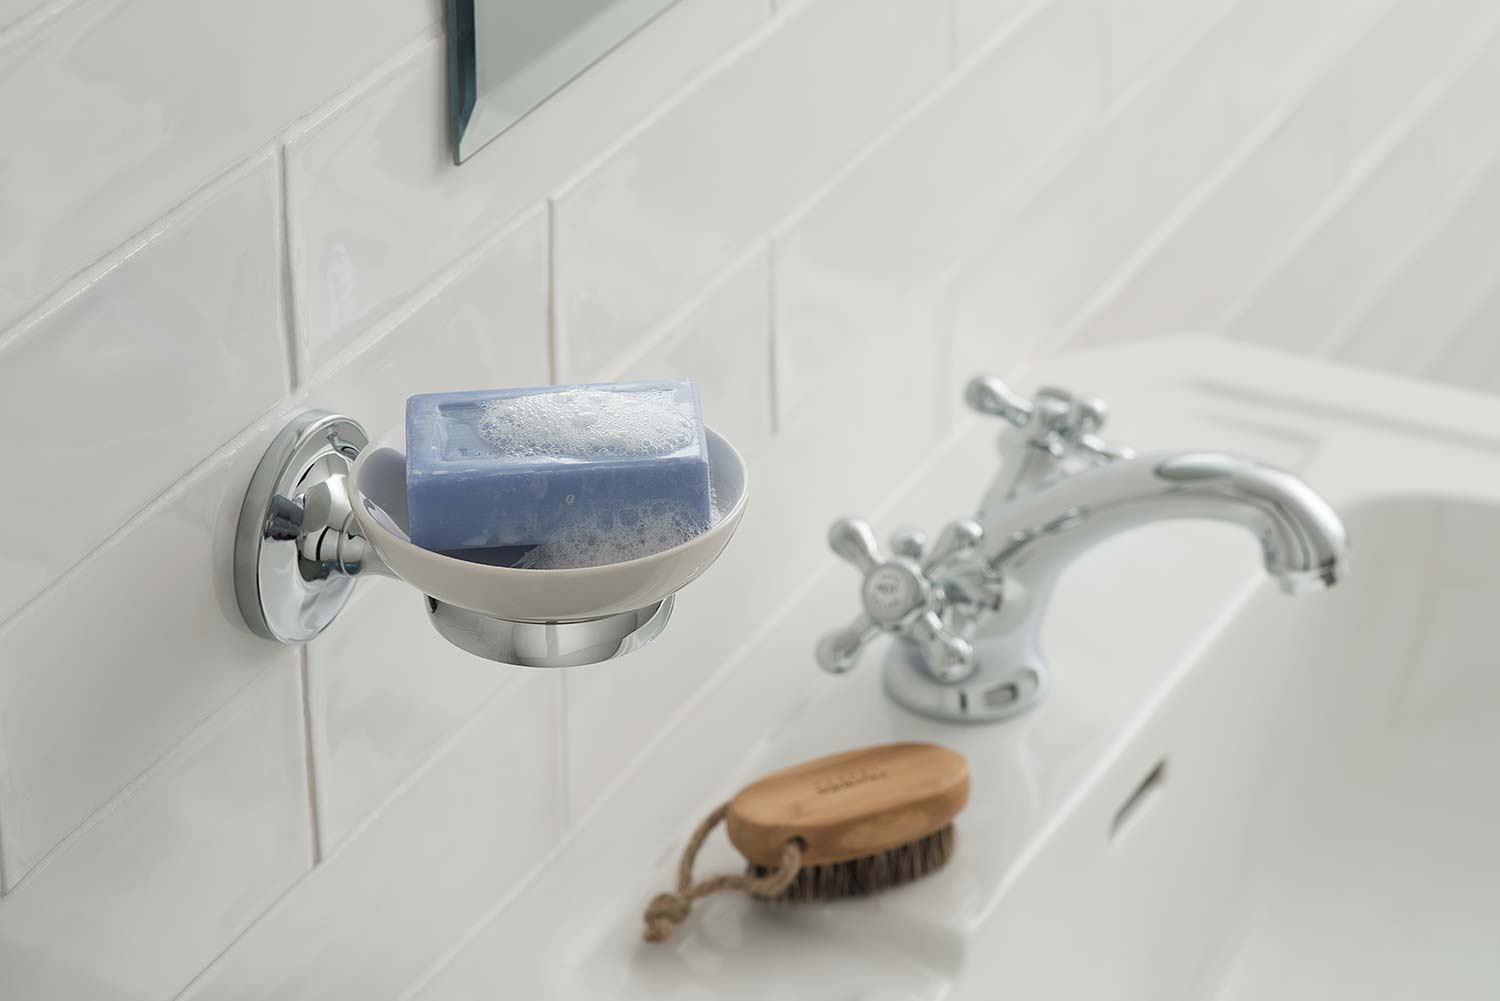 Traditional ceramic soap dish with a blue soap and chrome holder above a basin and nail brush.